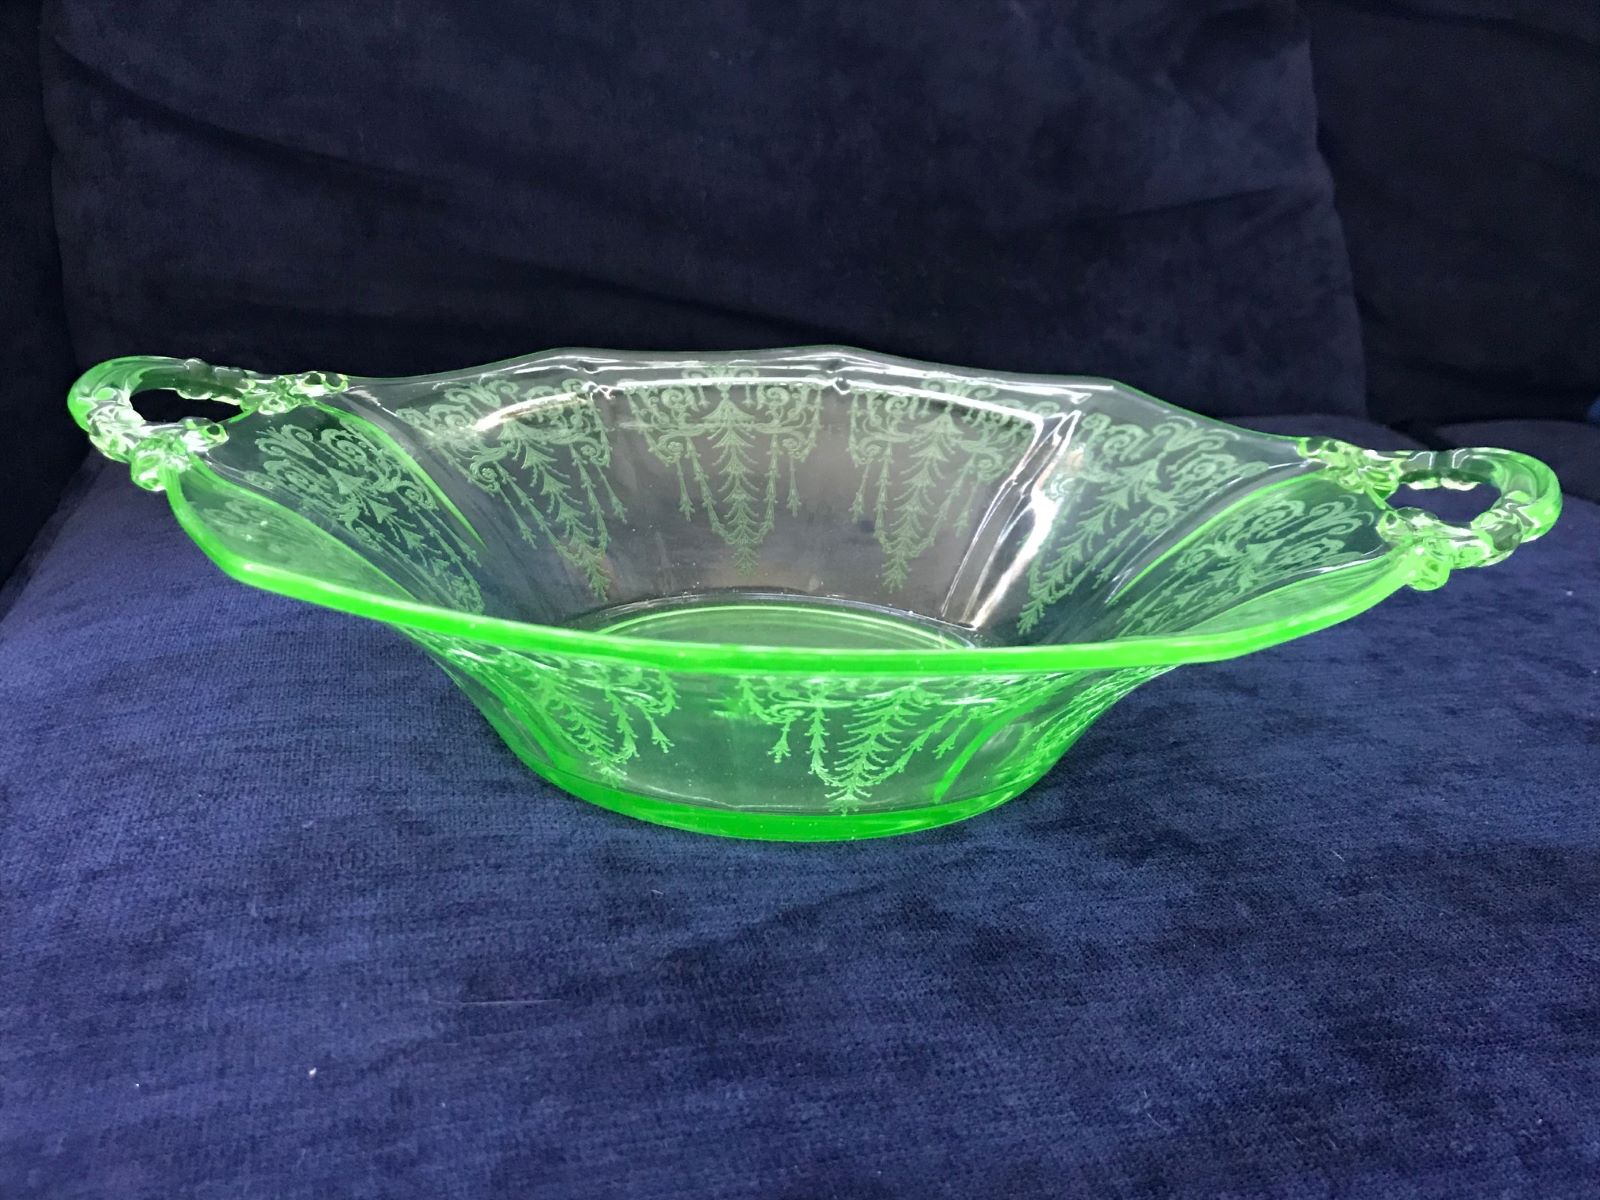 How To Tell If It’s Uranium Glass